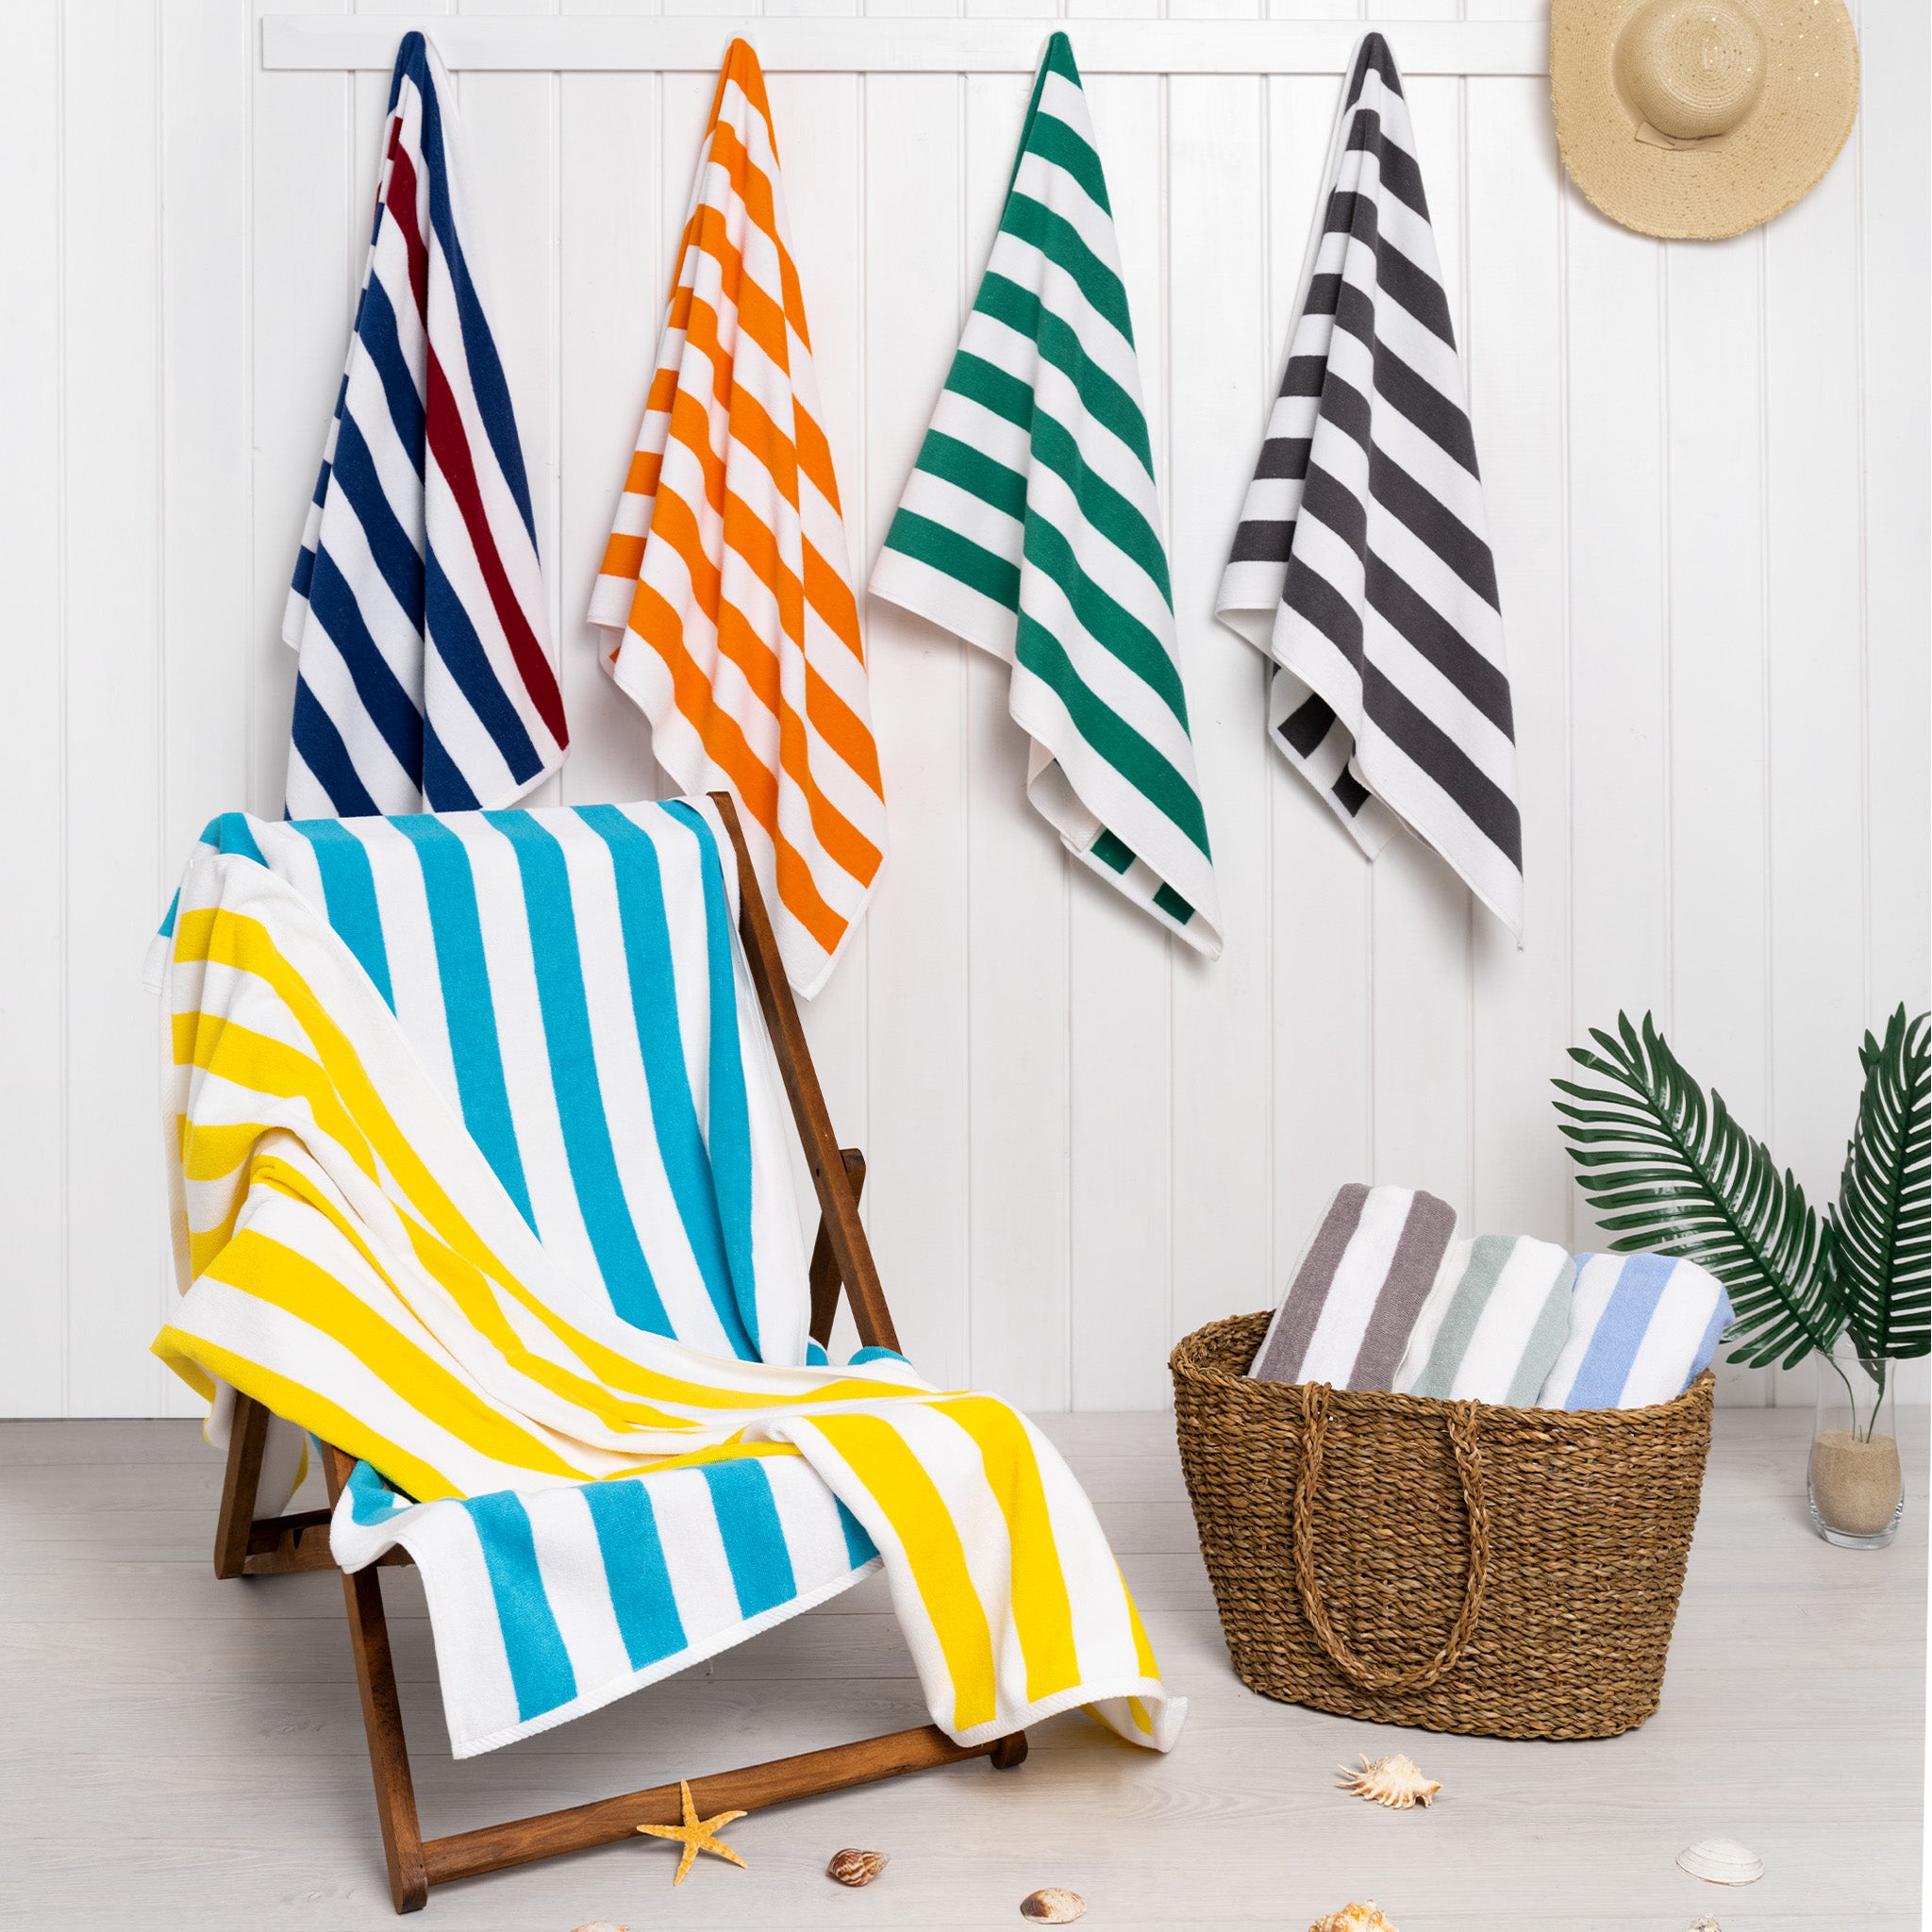 American Soft Linen 100% Cotton 4 Pack Beach Towels Cabana Striped Pool Towels -turquoise-blue-8